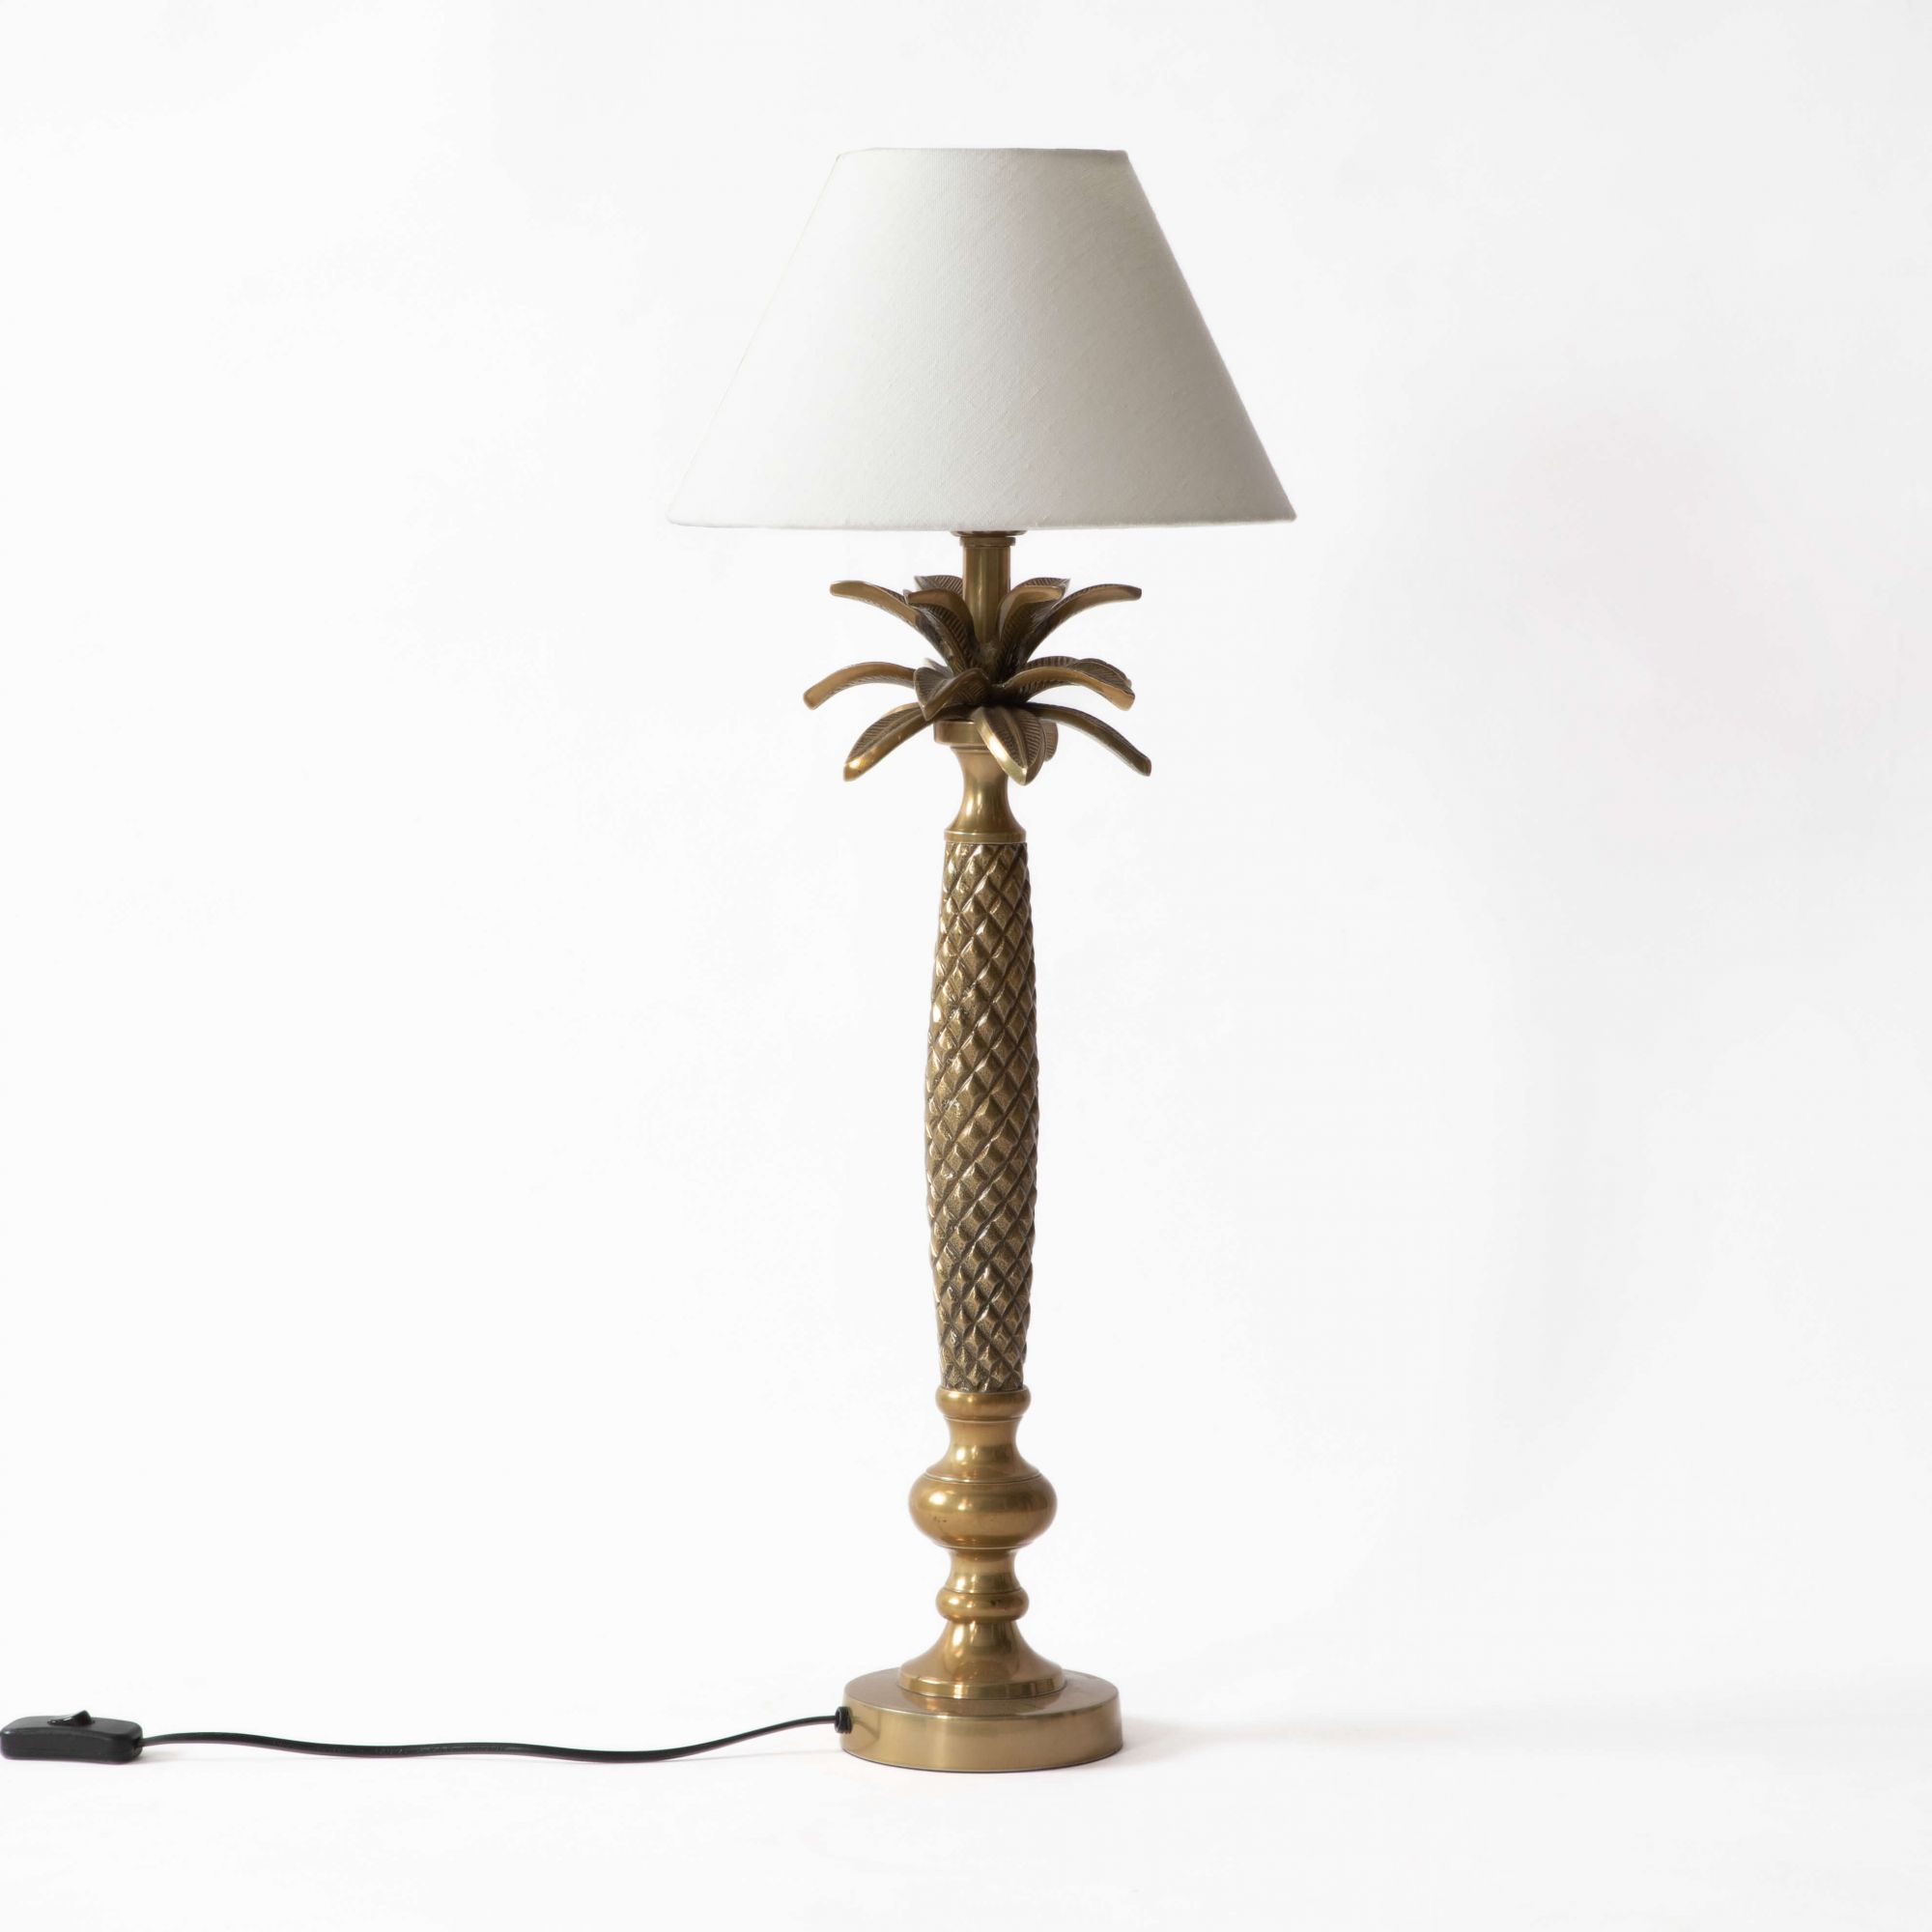 The Royal Palm Lamp Stand - Antique Brass